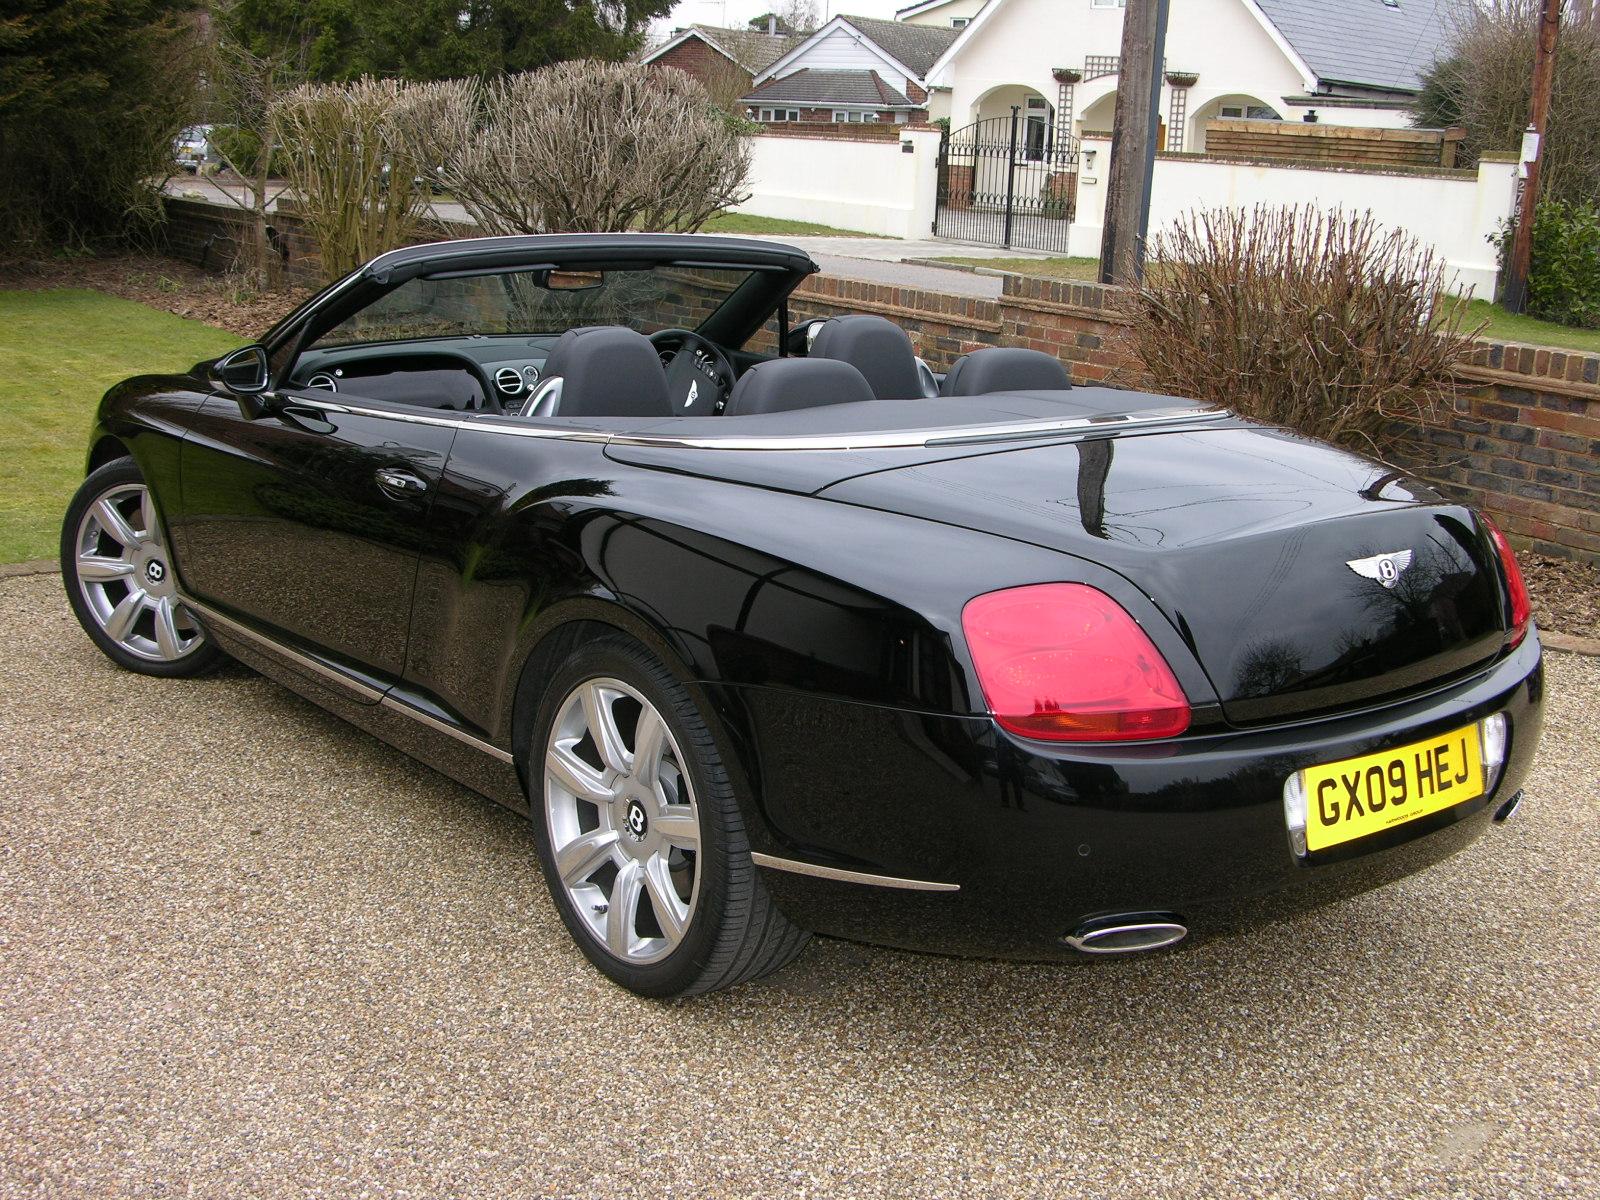 File:2009 Bentley Continental GTC - Flickr - The Car Spy.jpg - Wikimedia  Commons